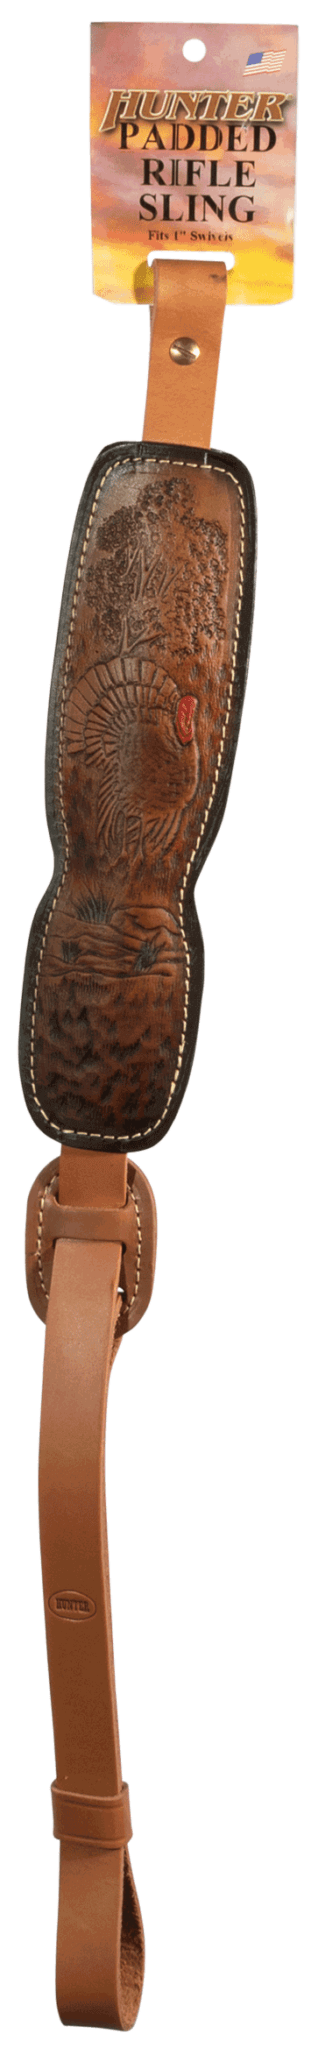 Hunter Company 027191 Trophy Custom Sling made of Brown Leather with Suede Lining Turkey Engraving & Padded Design for Rifles